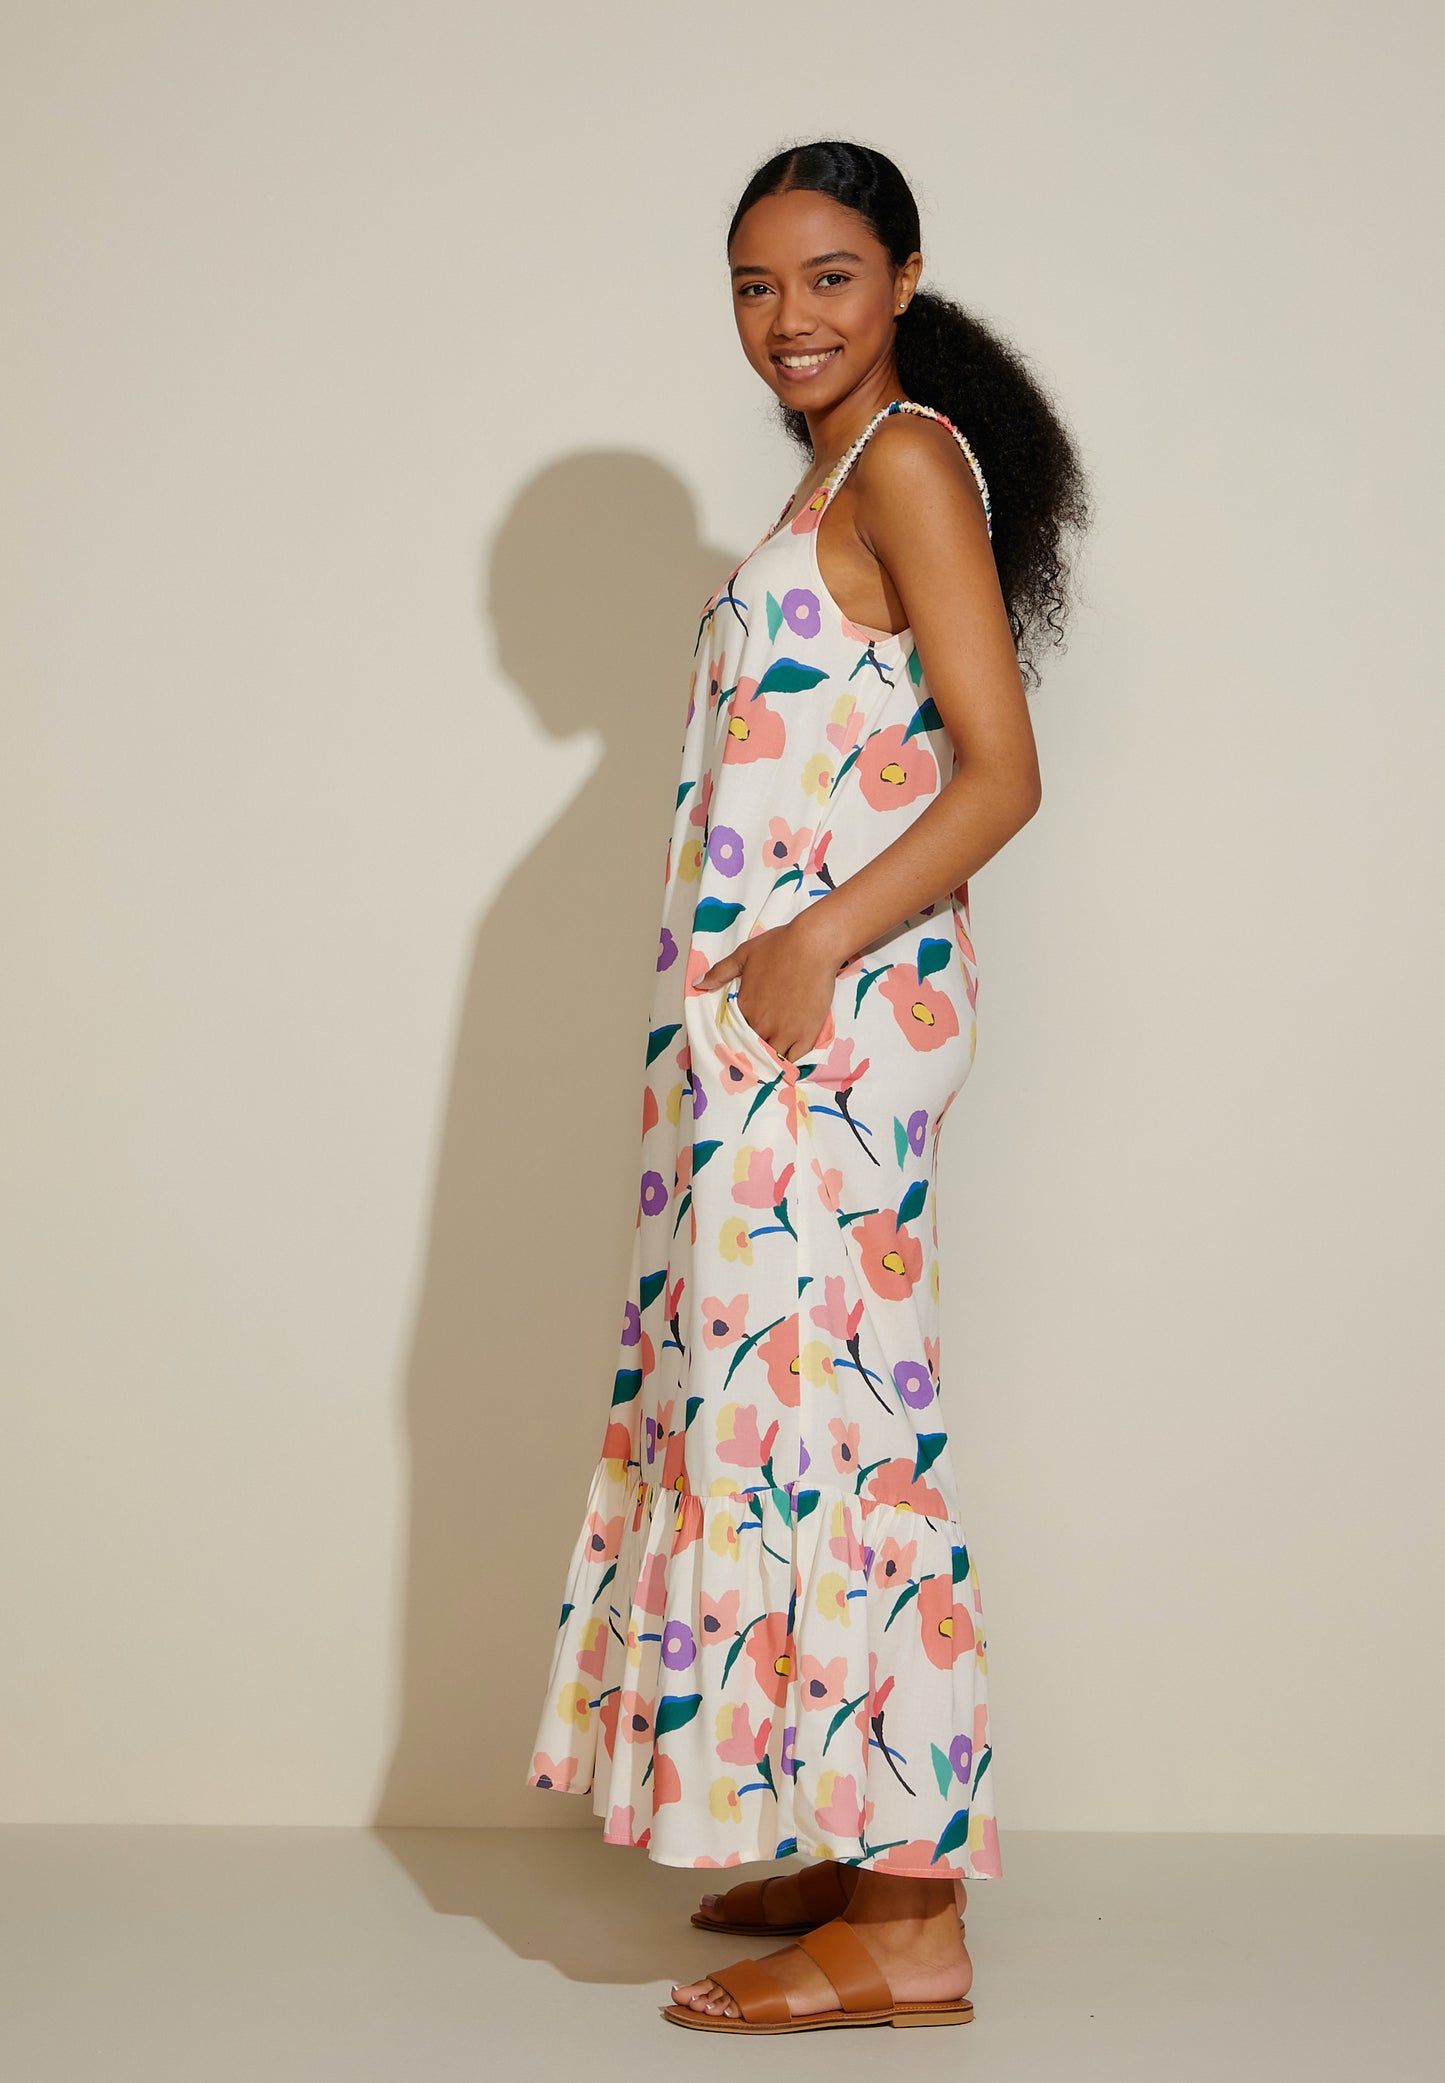 The Grand - Summer Bloom: Strappy maxi dress with pockets